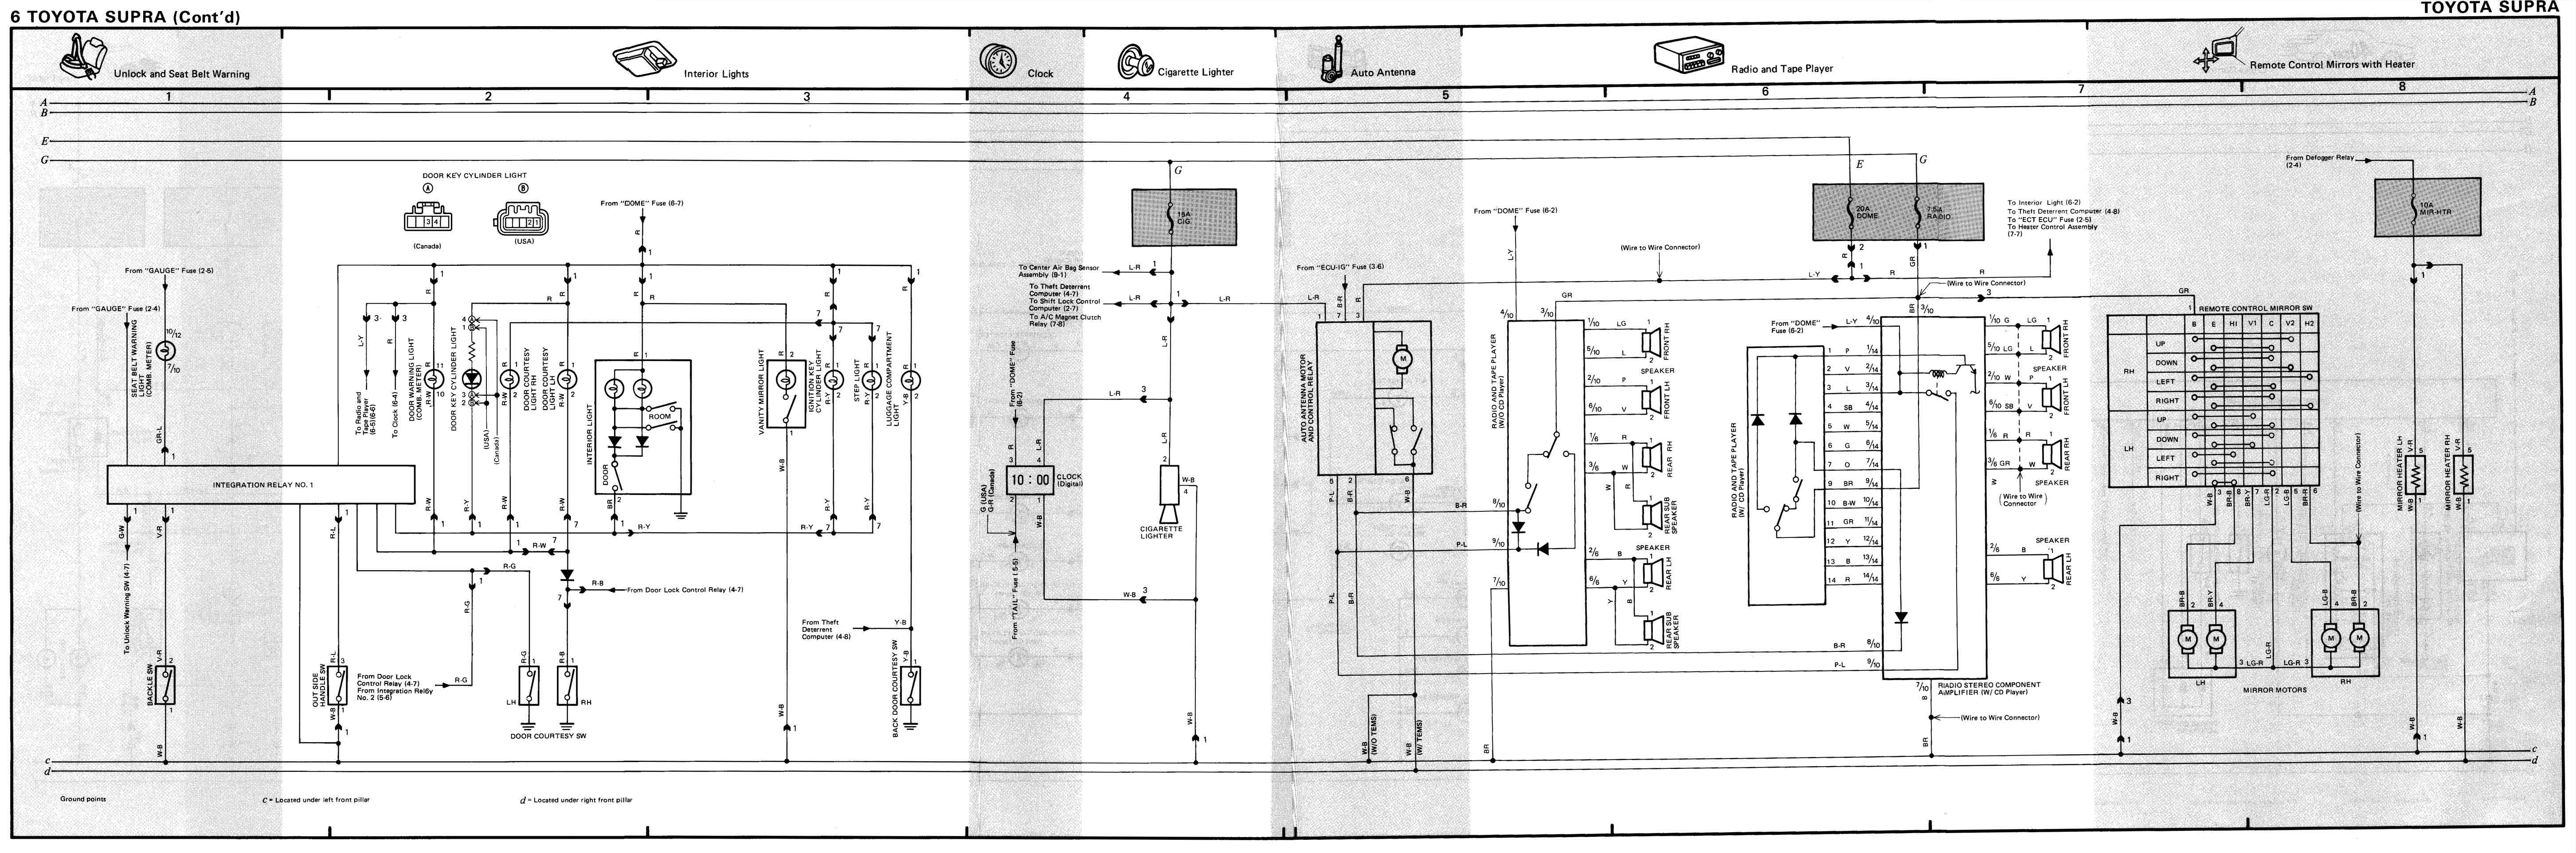 1989 Toyota Pickup Ignition Wiring Diagram from lh5.googleusercontent.com